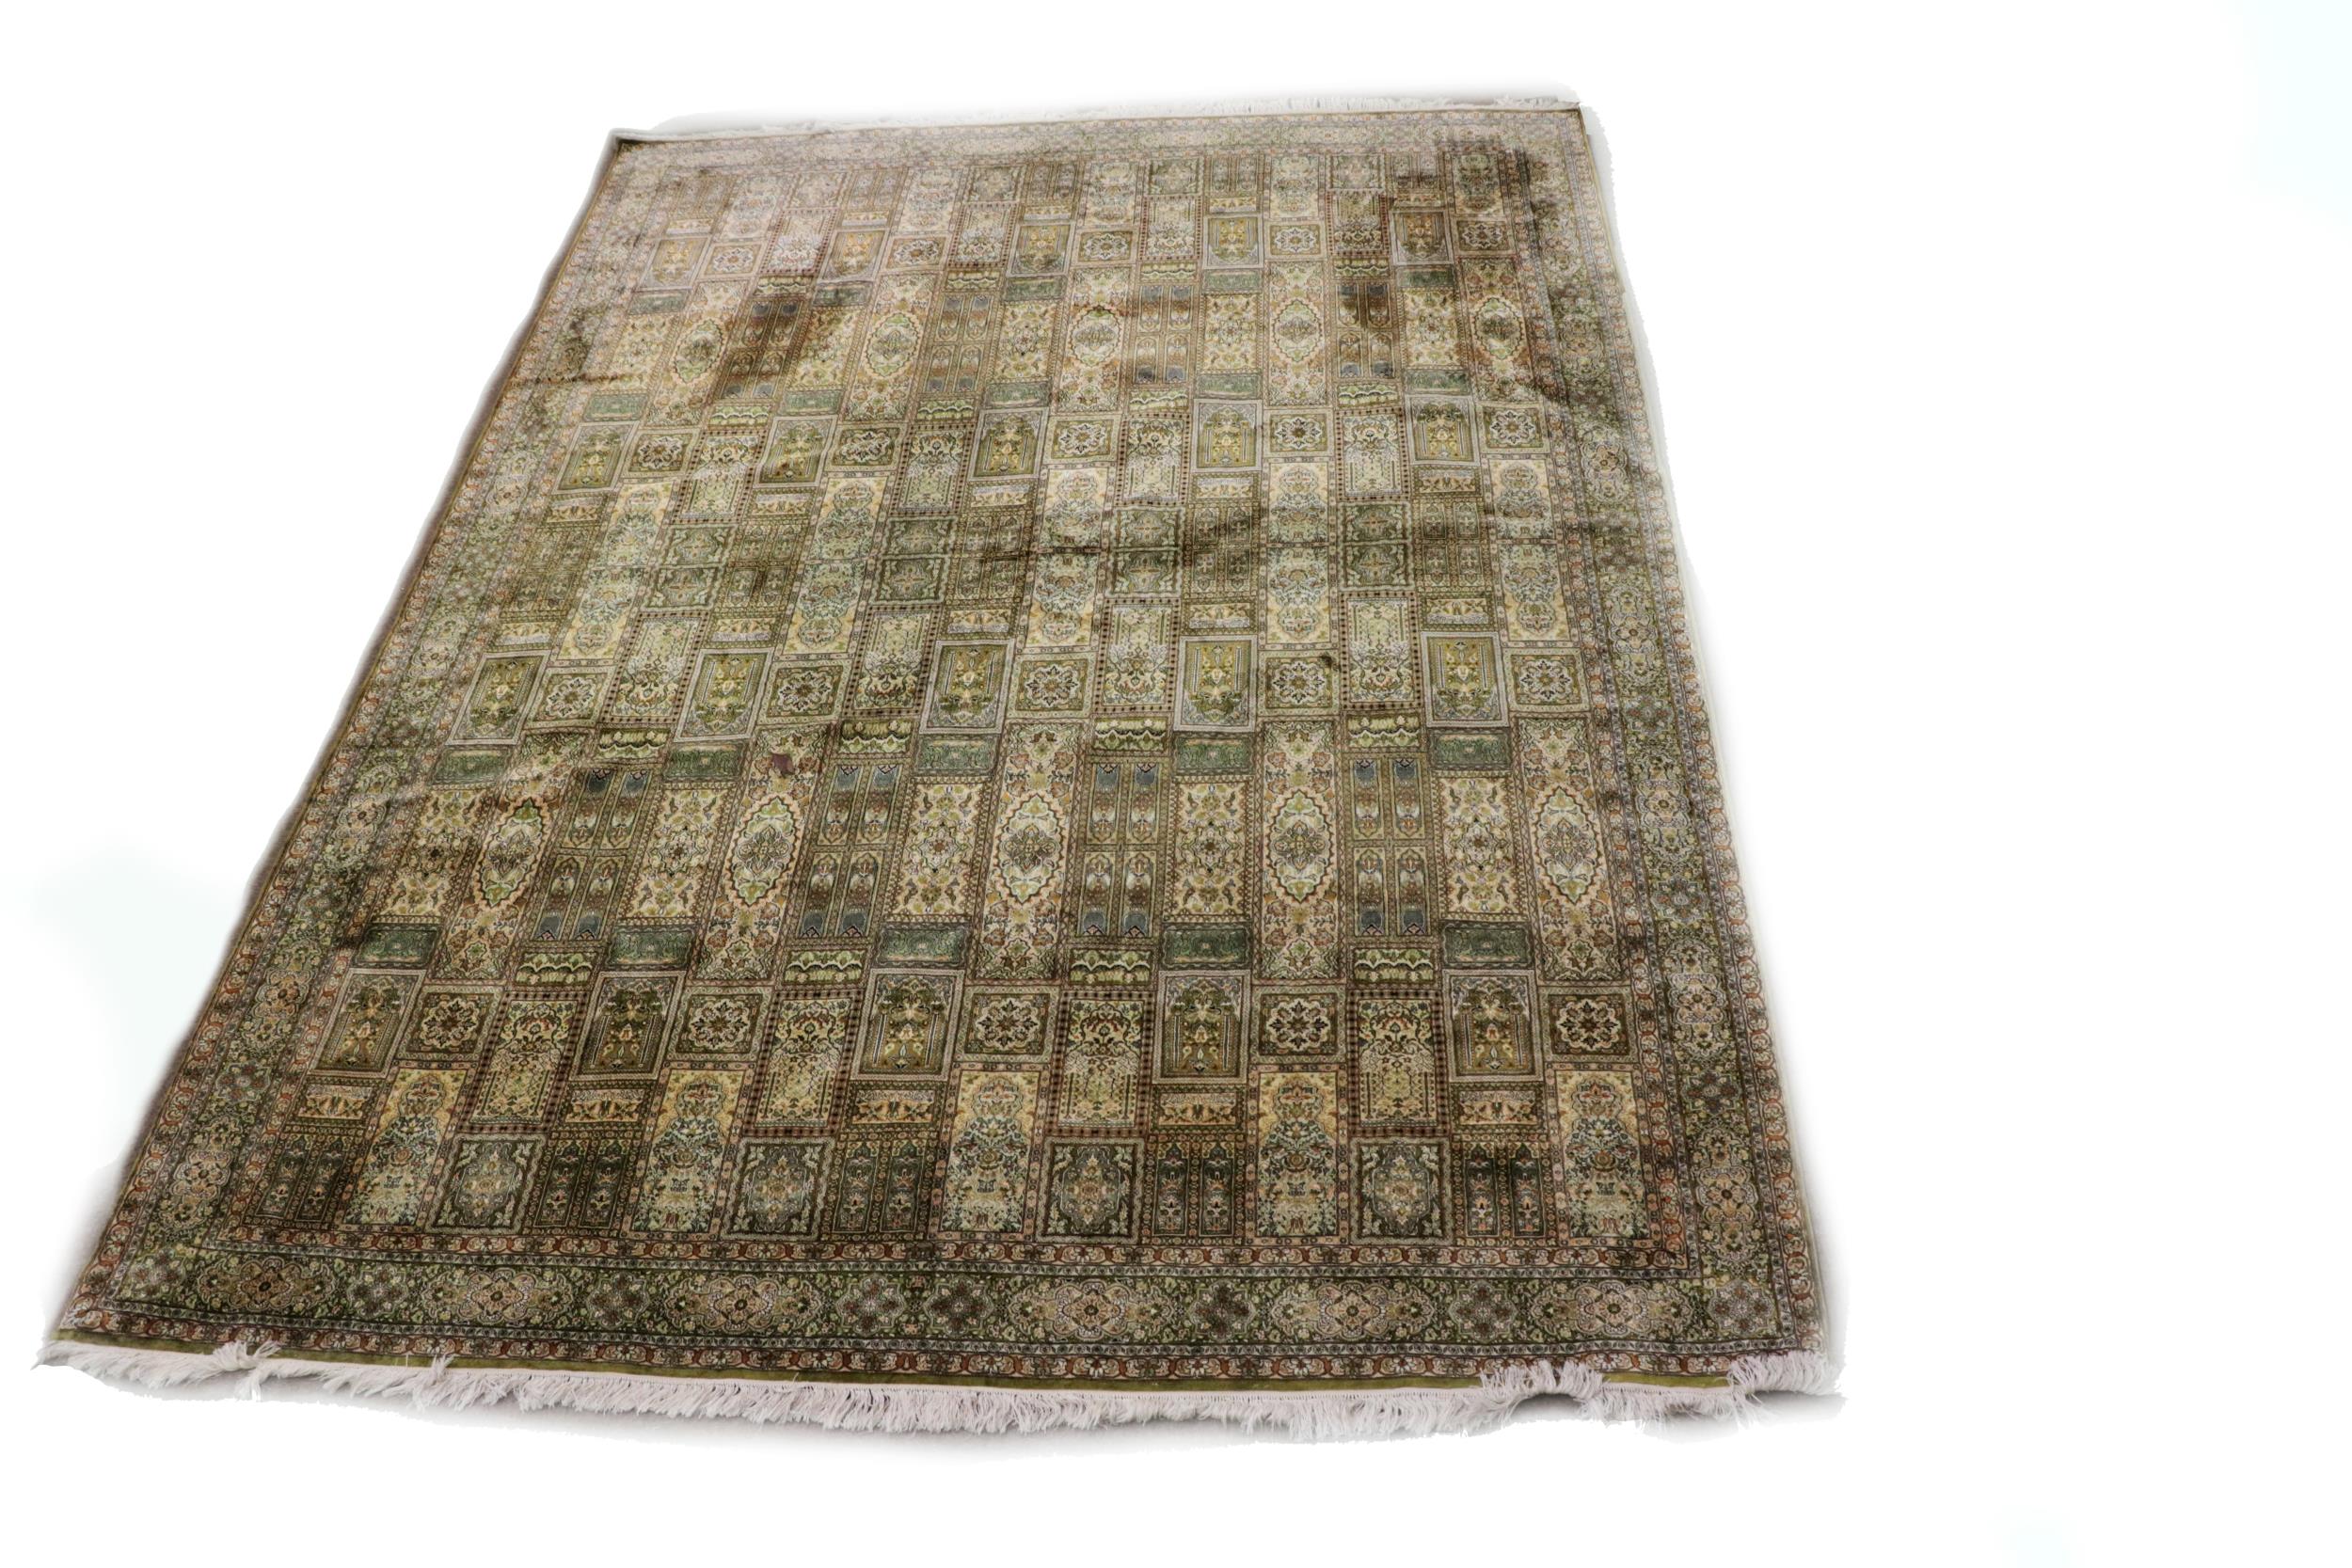 A fine quality Middle Eastern possibly Persian silk Carpet, the central platform with multiple